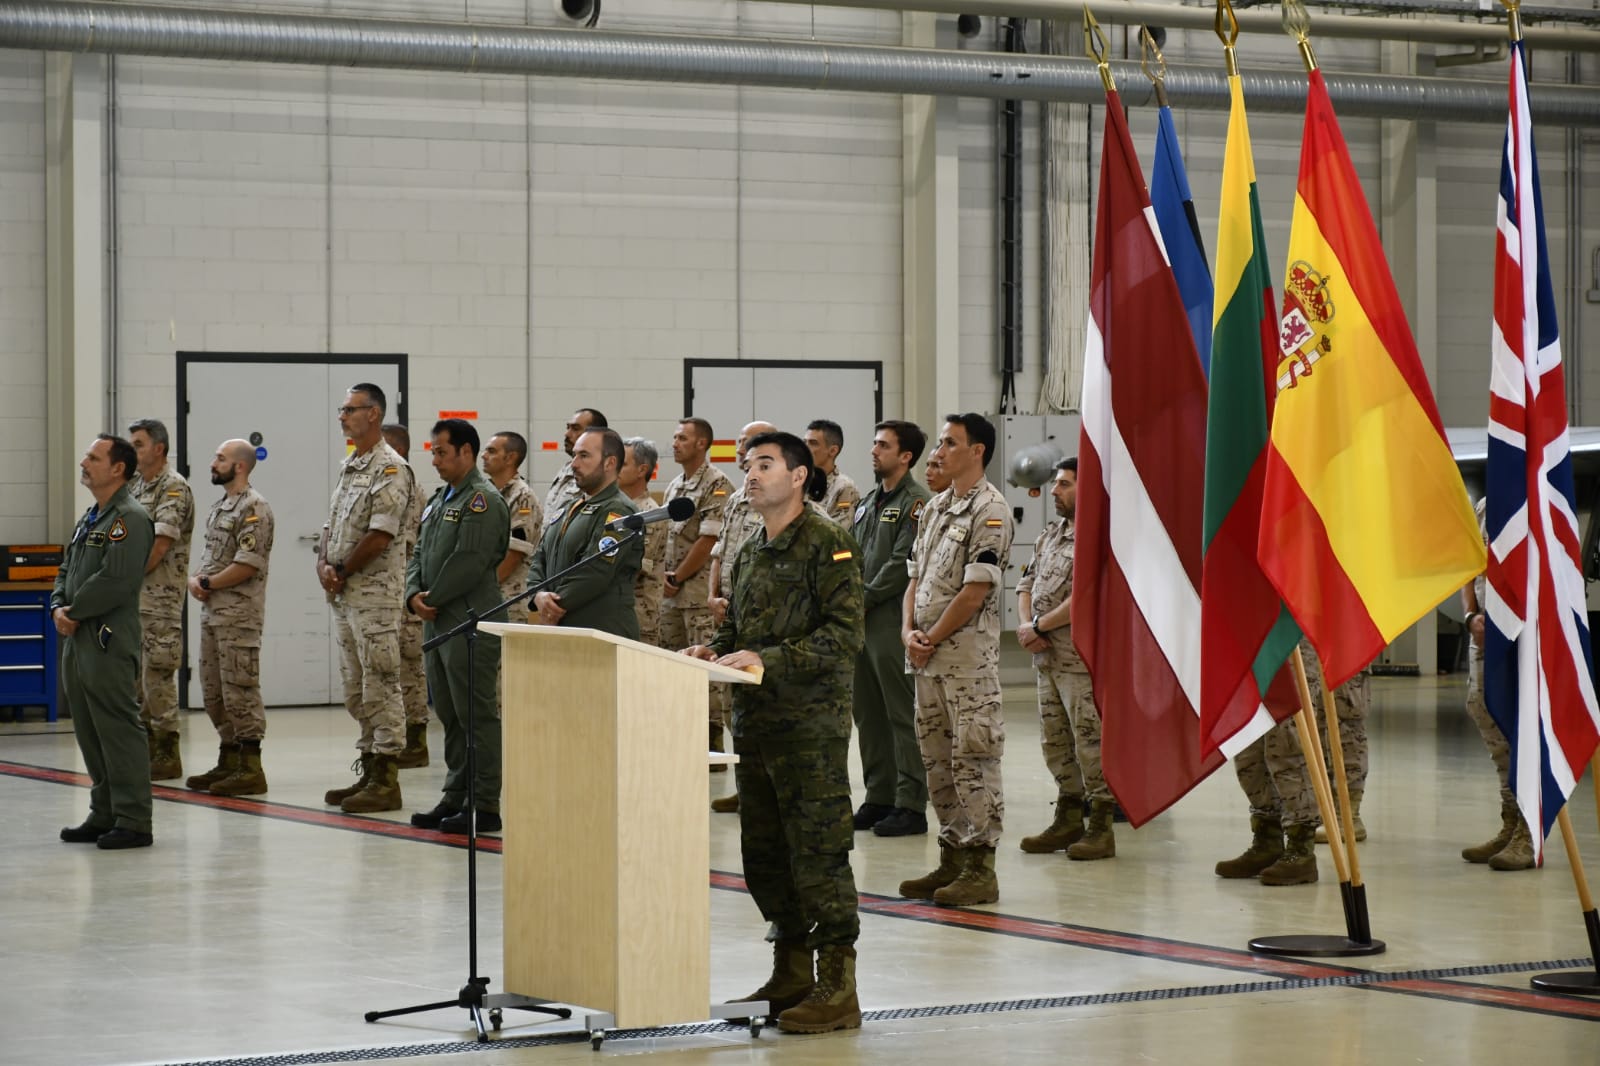 Speech by Air Commodore Martín Pascual